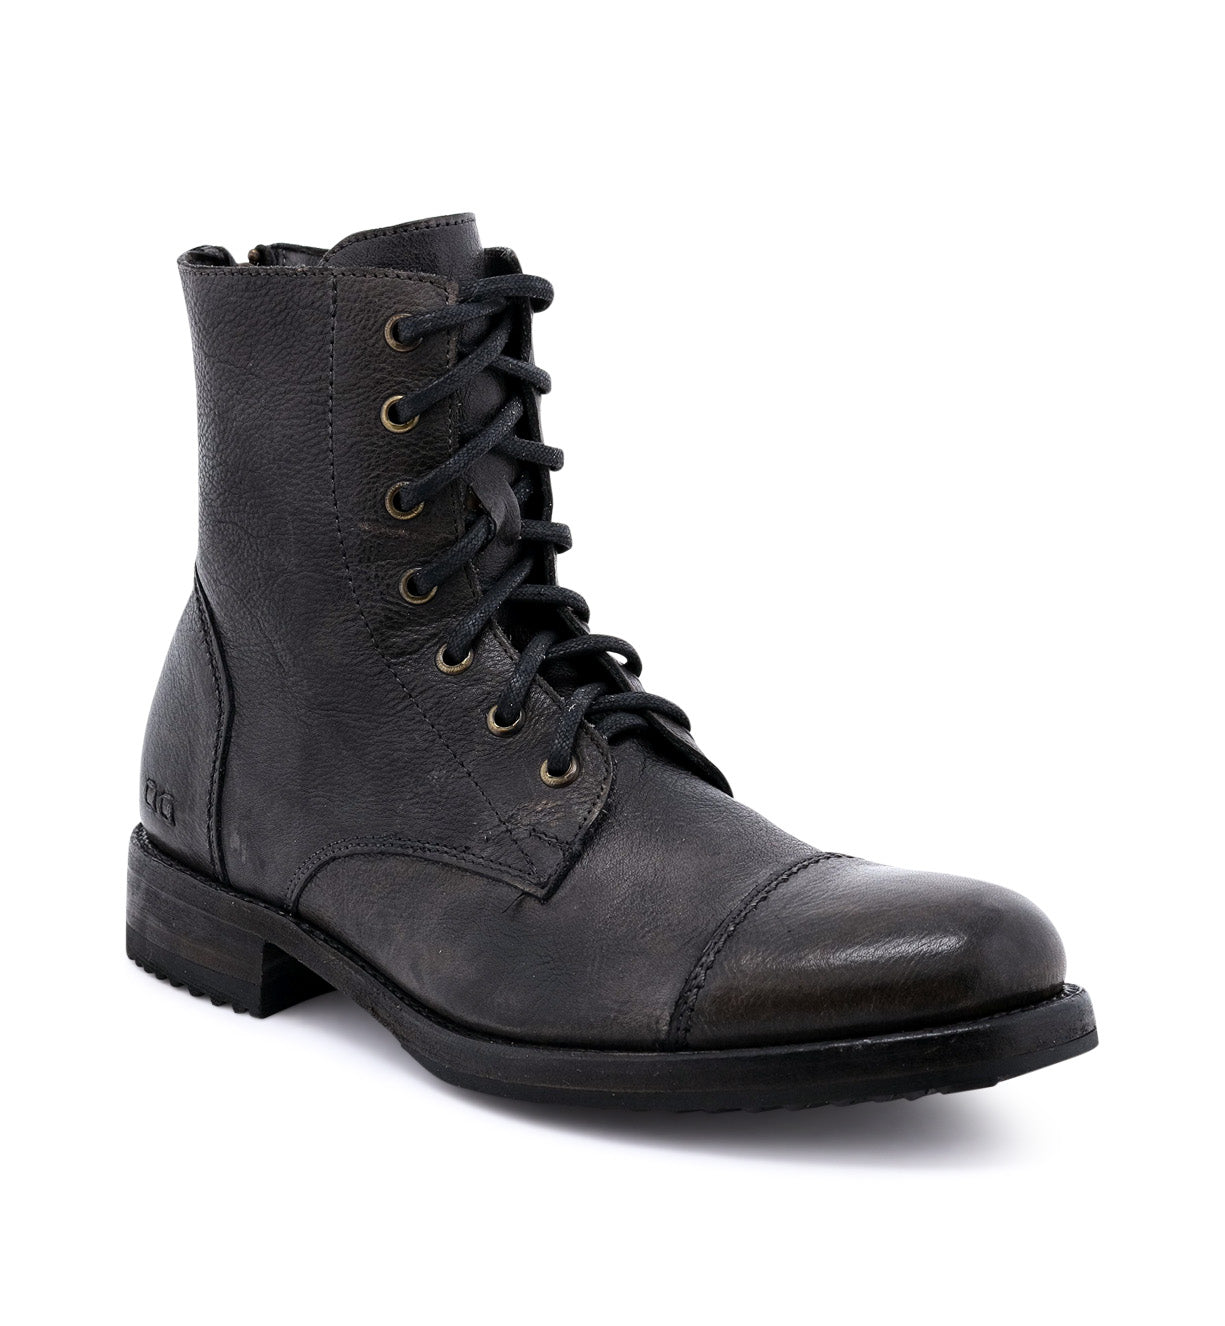 Men's black leather combat boots with laces, the Protege by Bed Stu.